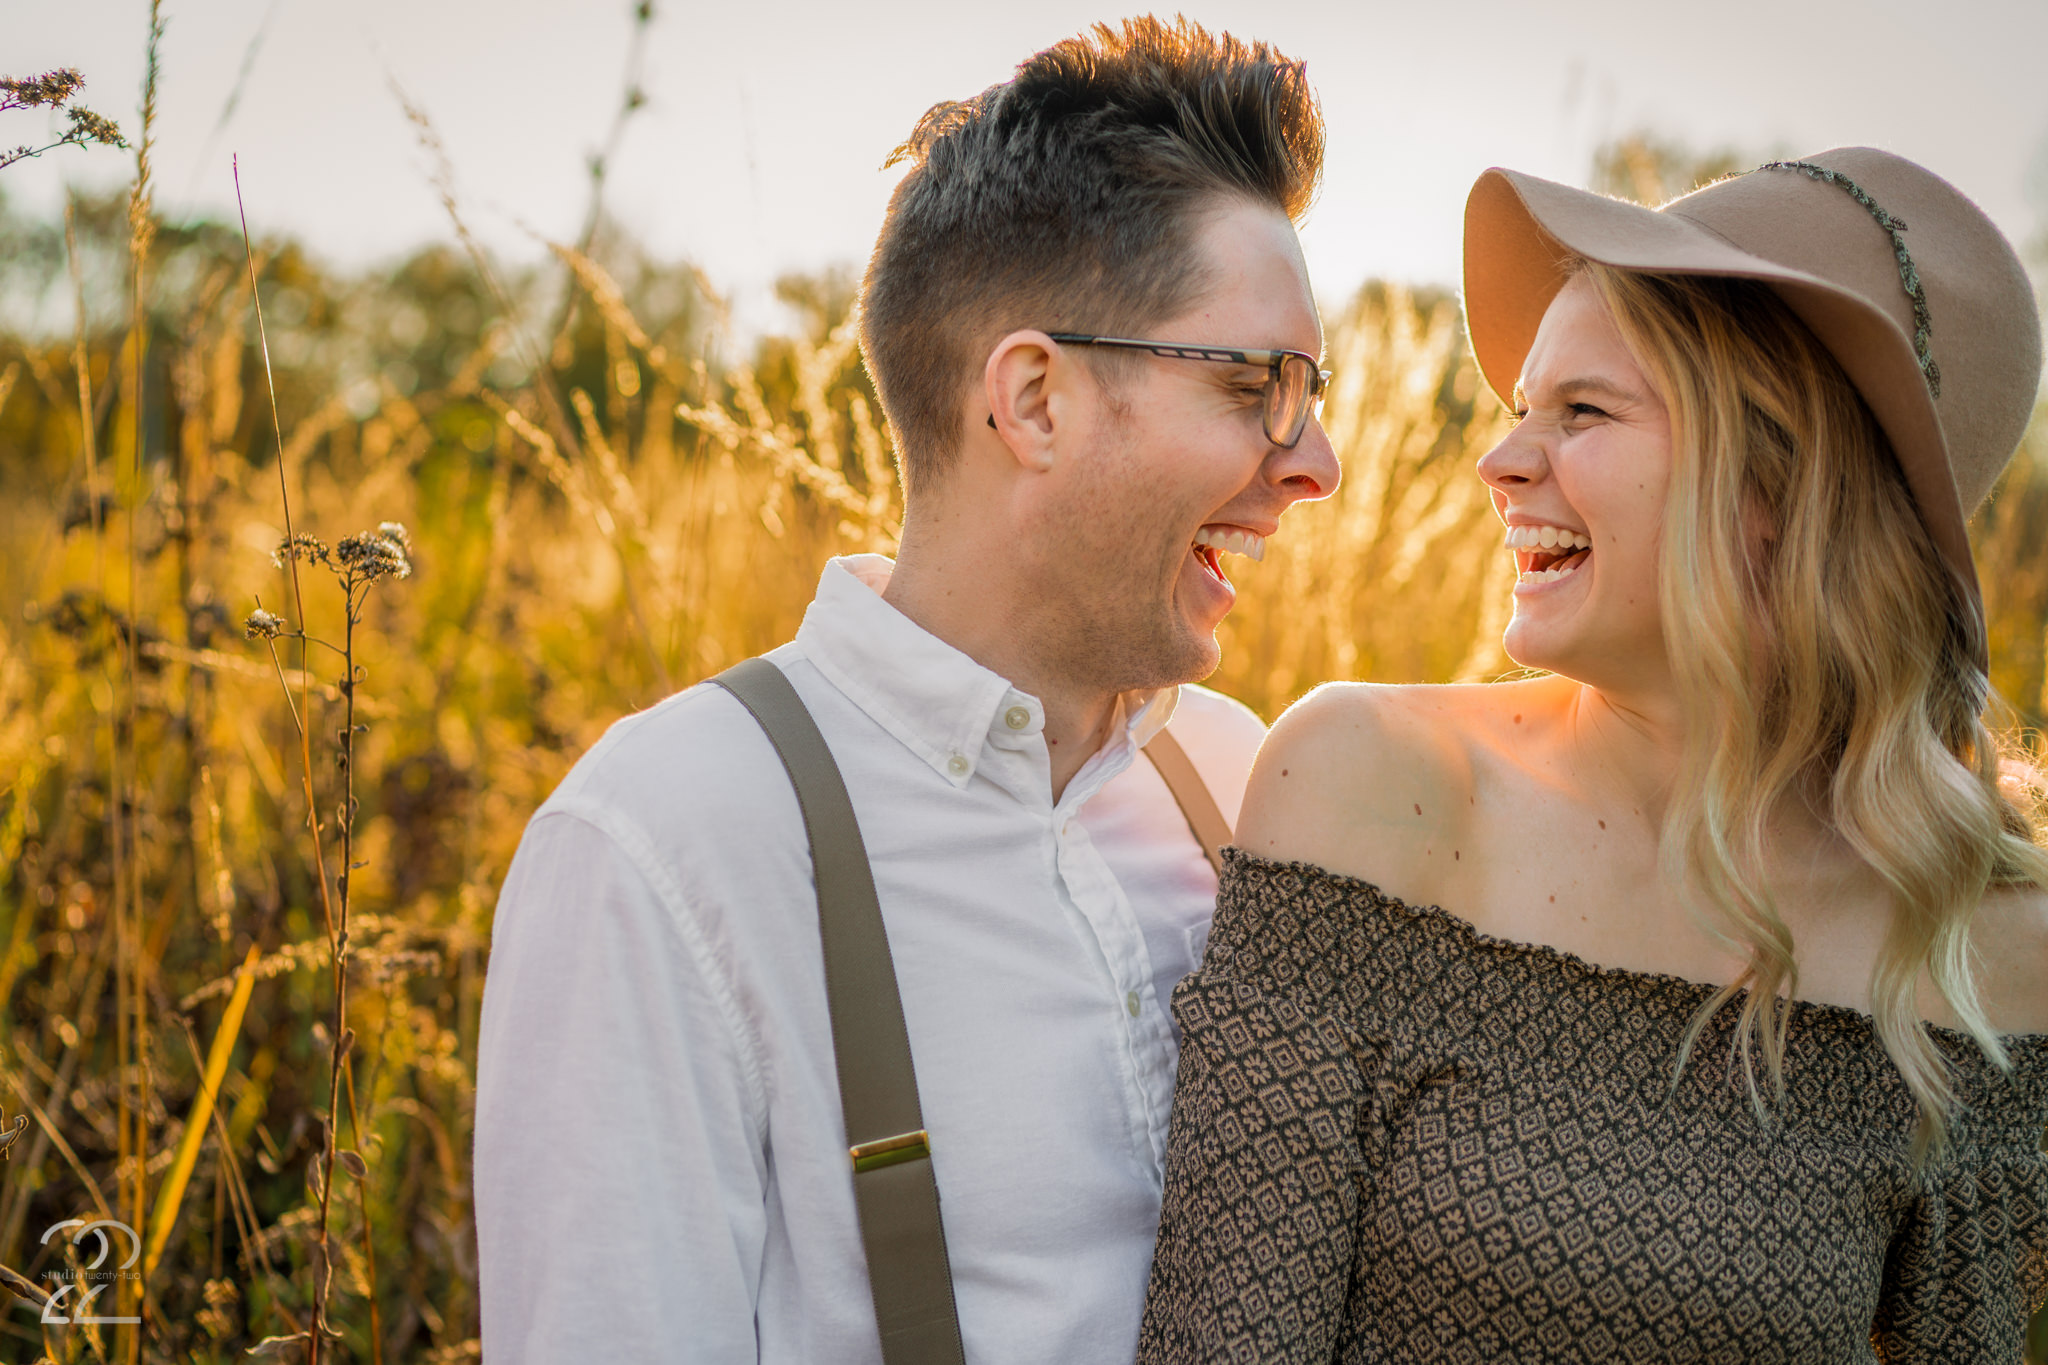 Man and woman laugh together in a field during sunset at Wegerzyn Garden Metropark by Dayton Wedding Photographer Studio 22 Photography